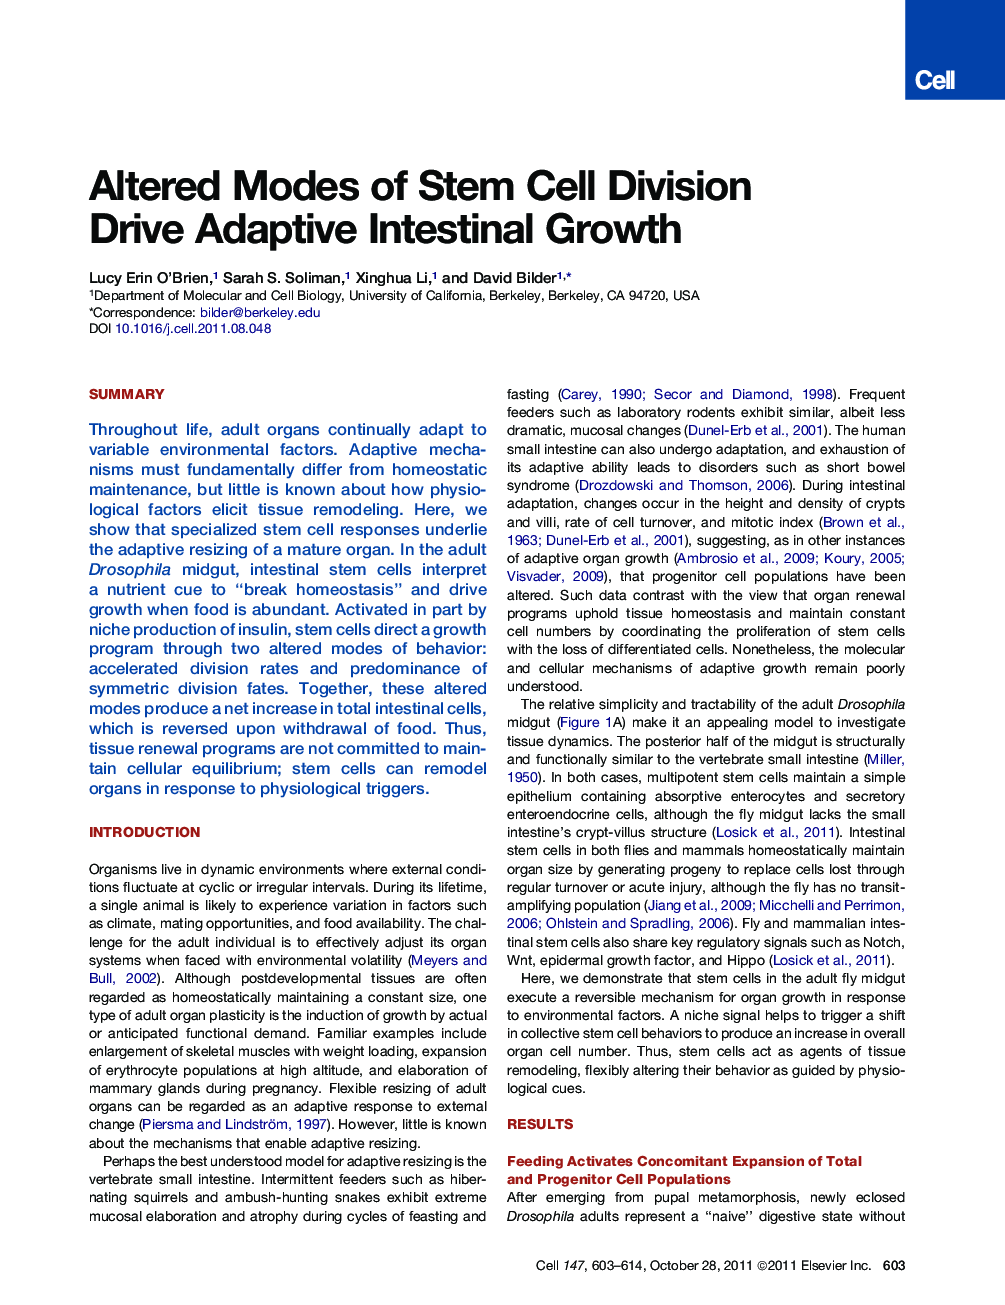 Altered Modes of Stem Cell Division Drive Adaptive Intestinal Growth